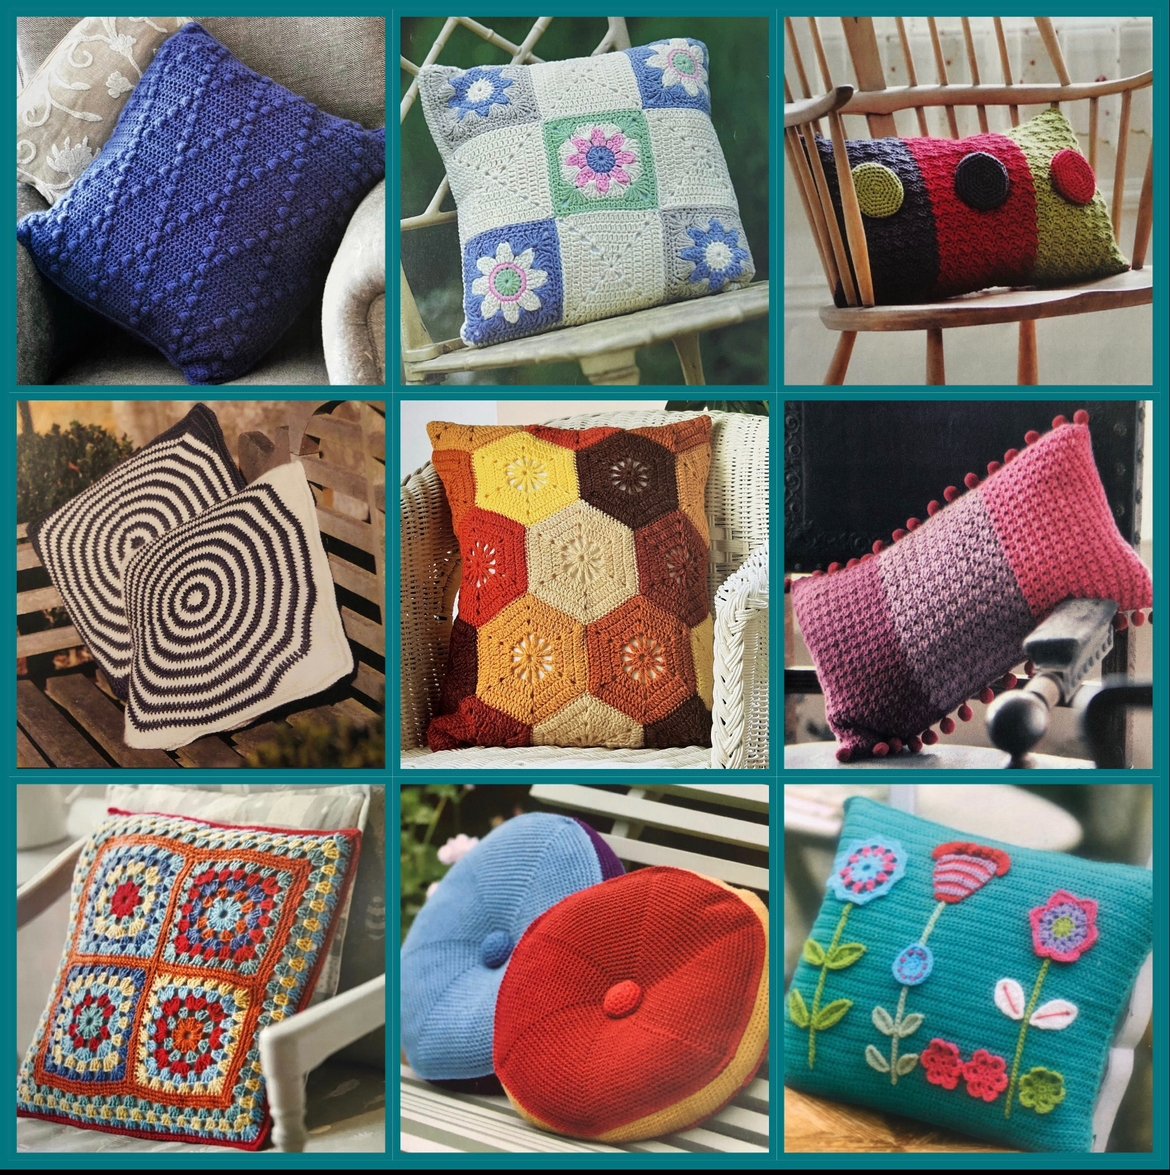 Here are some of my crochet cushion patterns 🧵🧶 Make for the home or as gifts for friends and loved ones #MHHSBD #earlybiz #CraftBizParty #Yarn #Cushion #UKMakers #sew #crochet #hobby #giftideas #planahead #wip etsy.com/uk/shop/DWCroc…